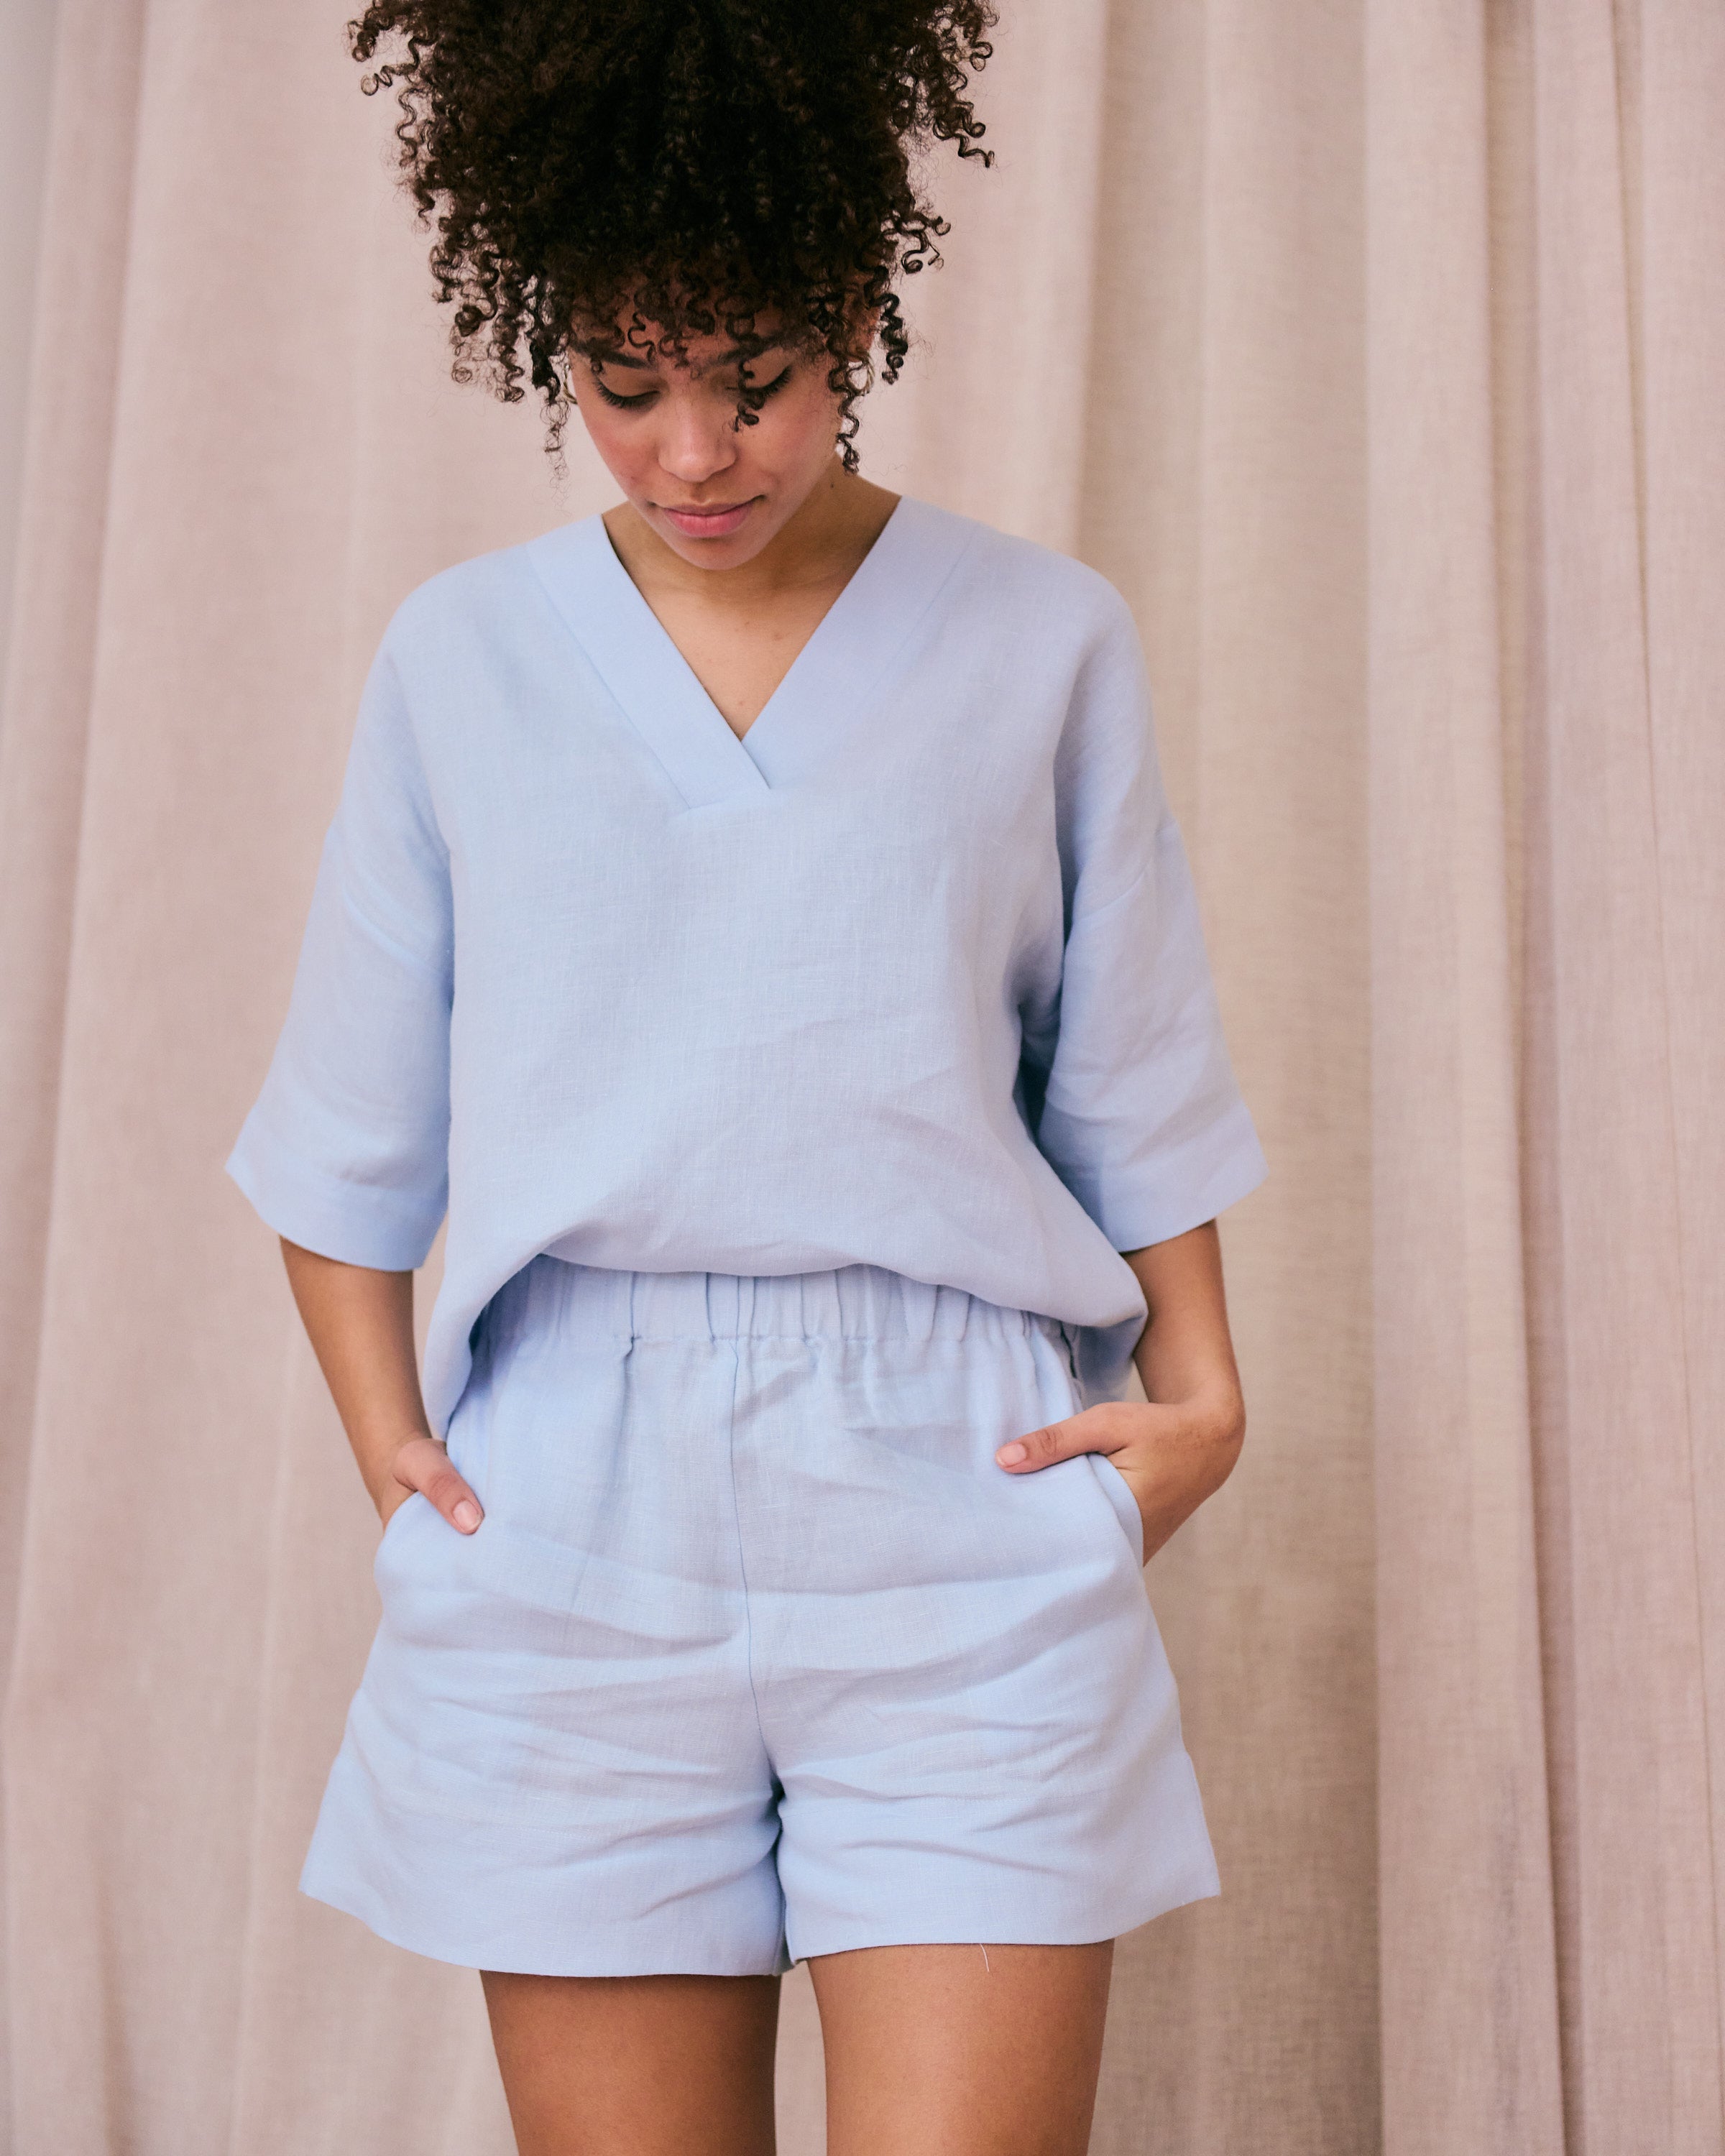 Comfortable light blue linen top and shorts.